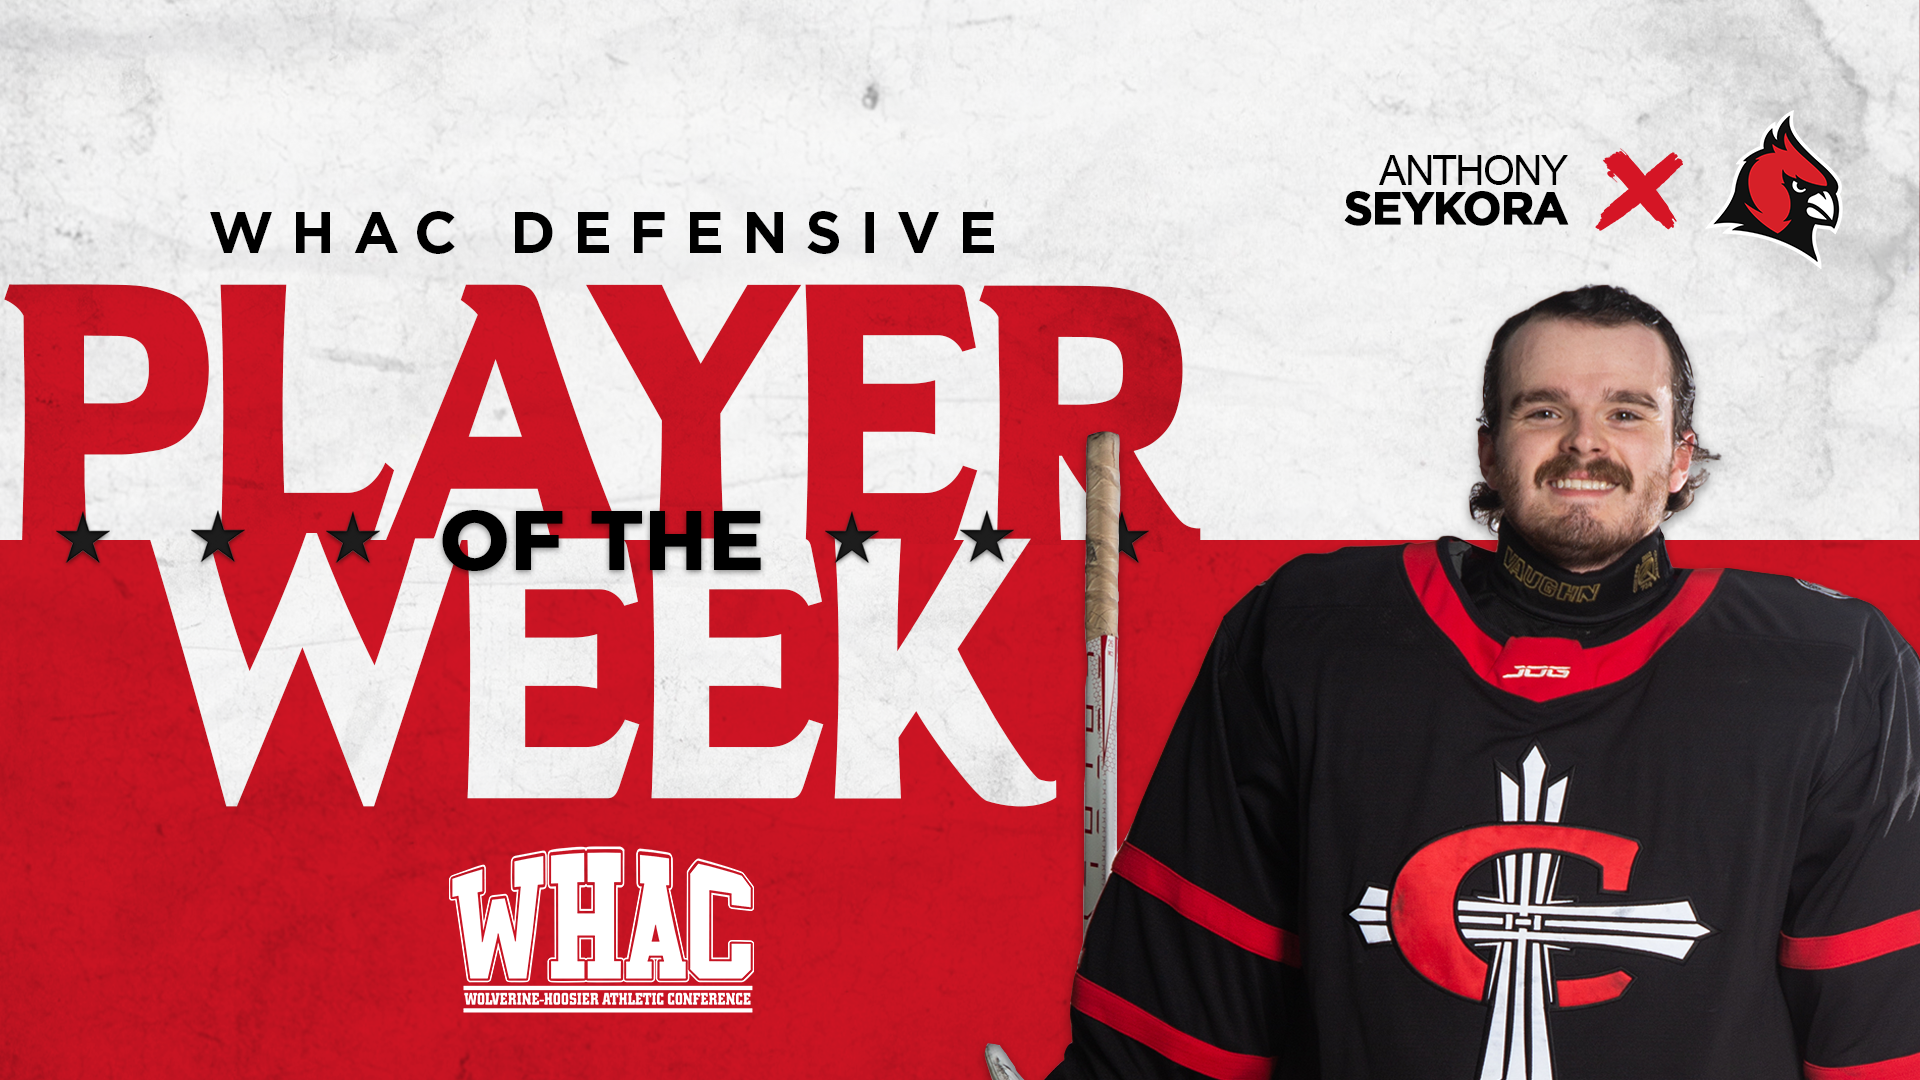 Seykora takes home second WHAC Player of the Week honors